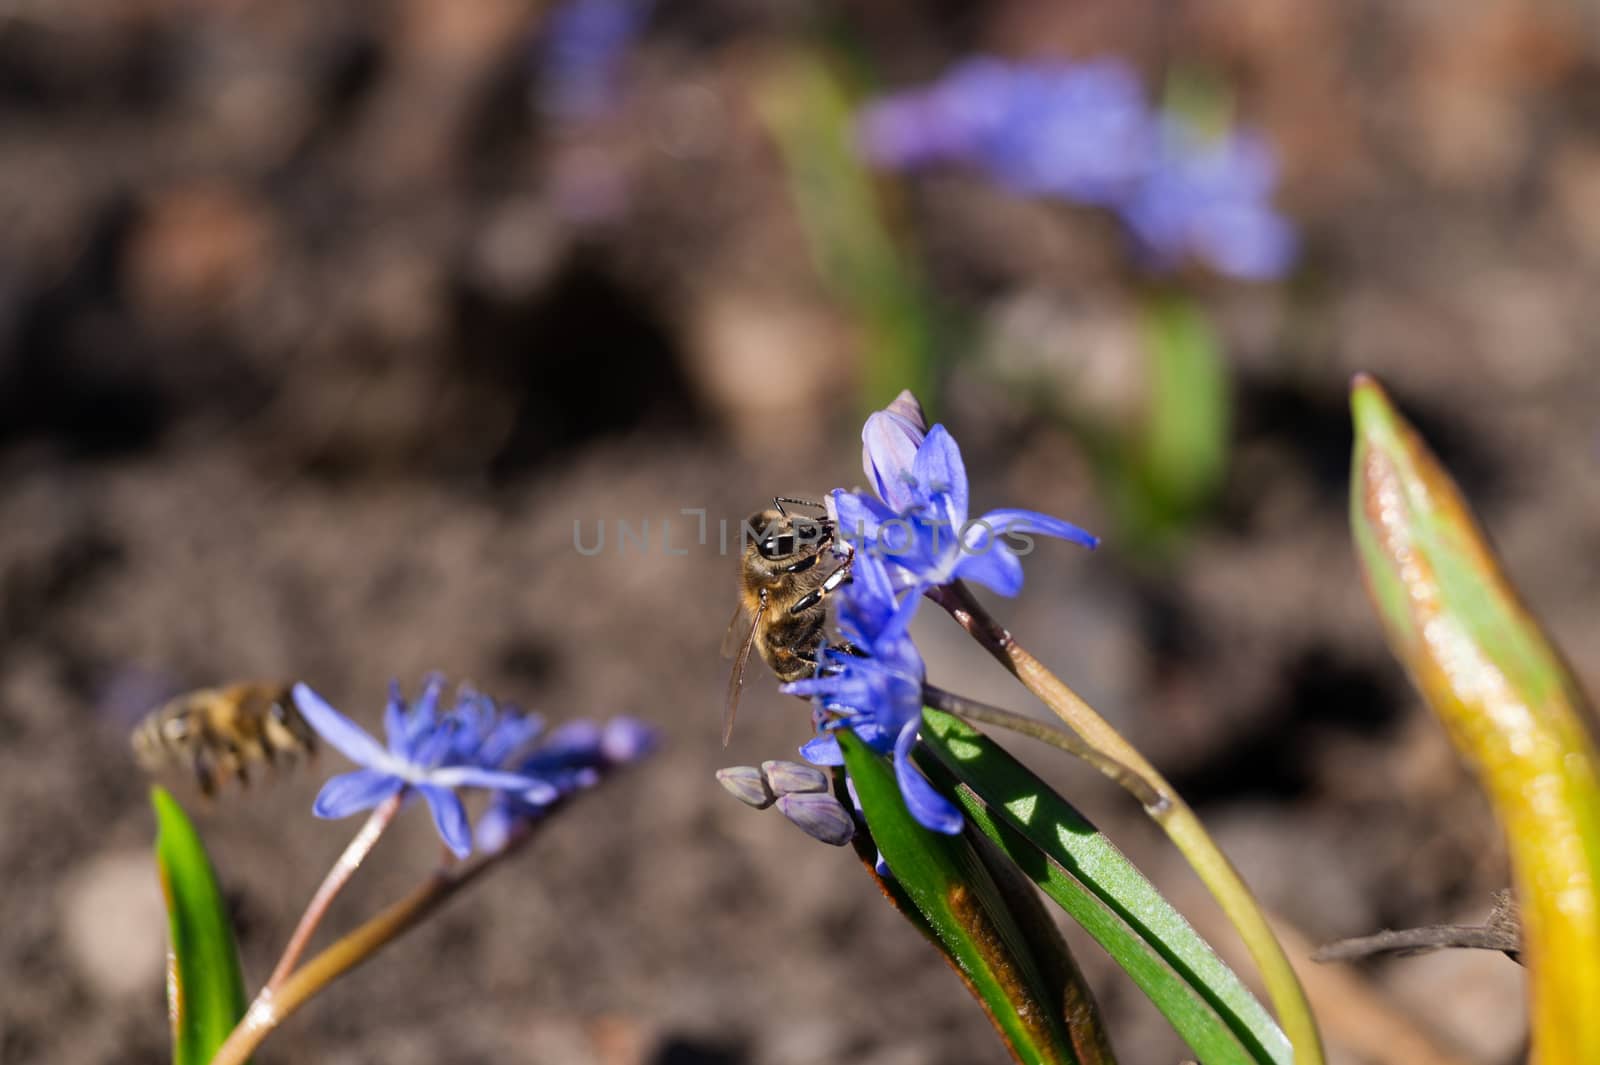 A bee on bluebell flowers in the spring garden close up. Background is blurred. by alexsdriver